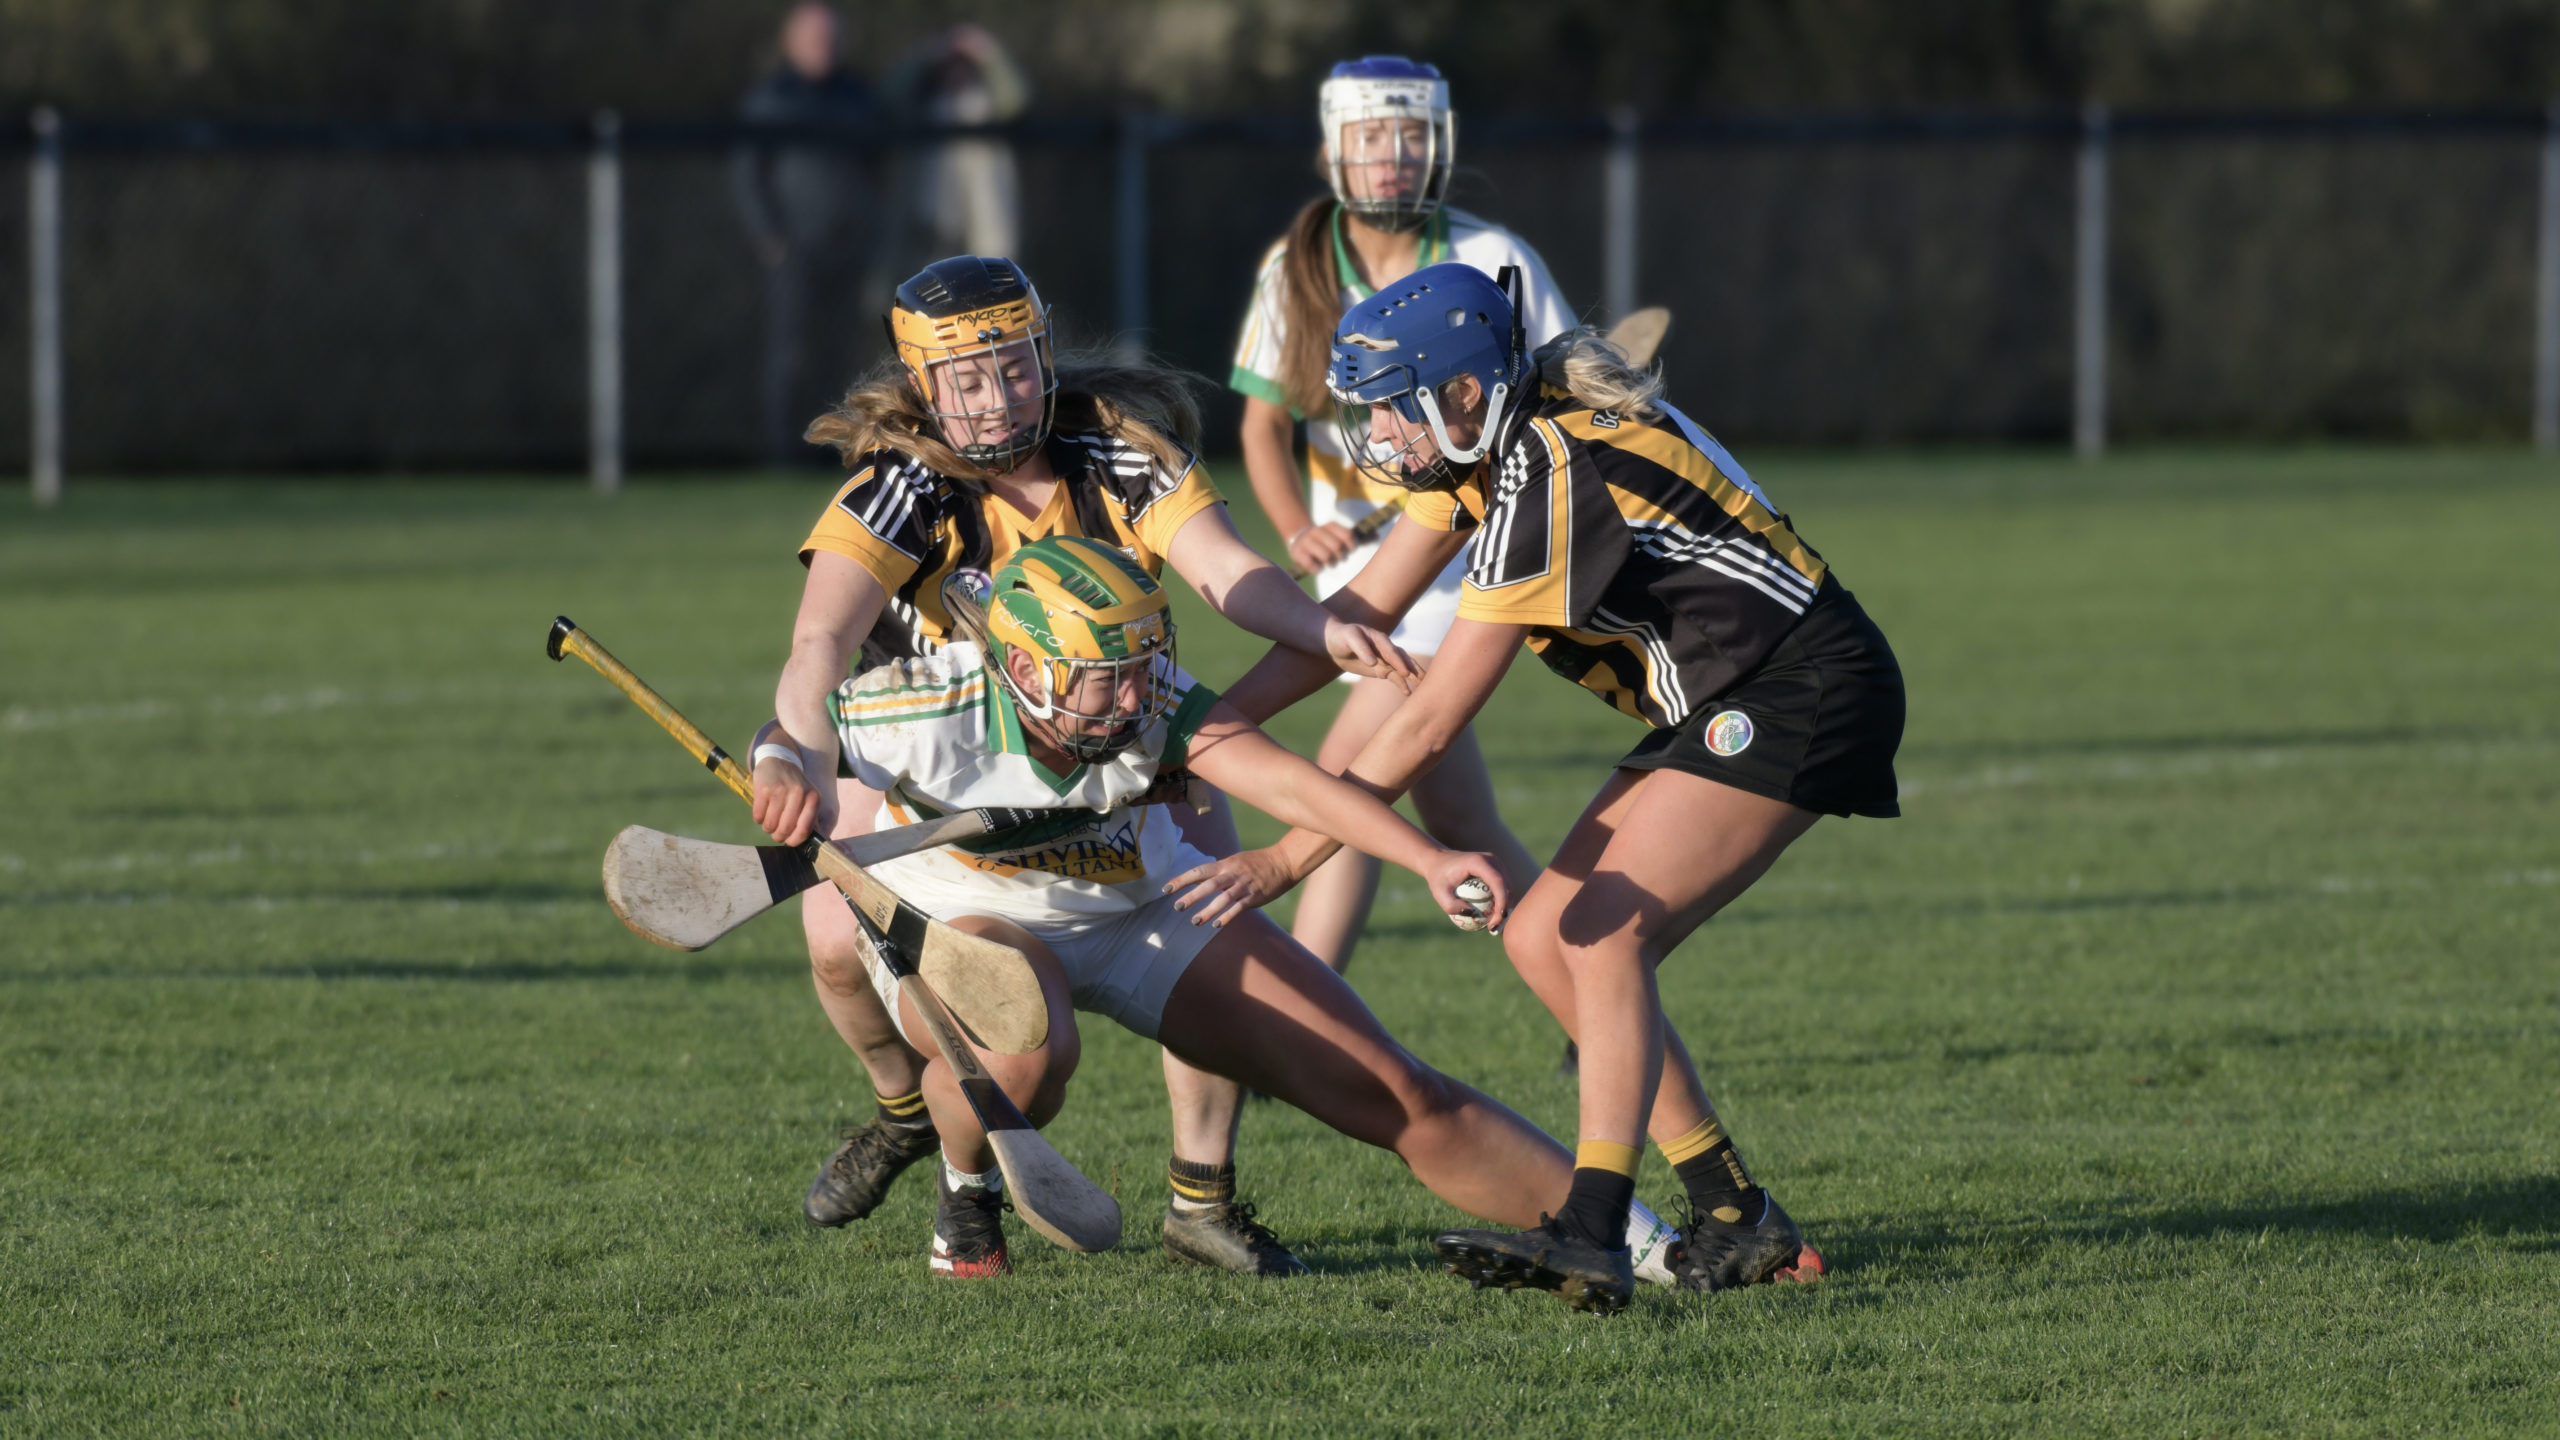 Ballycran run out of time to catch Liatroim in the Down Senior Camogie Championship